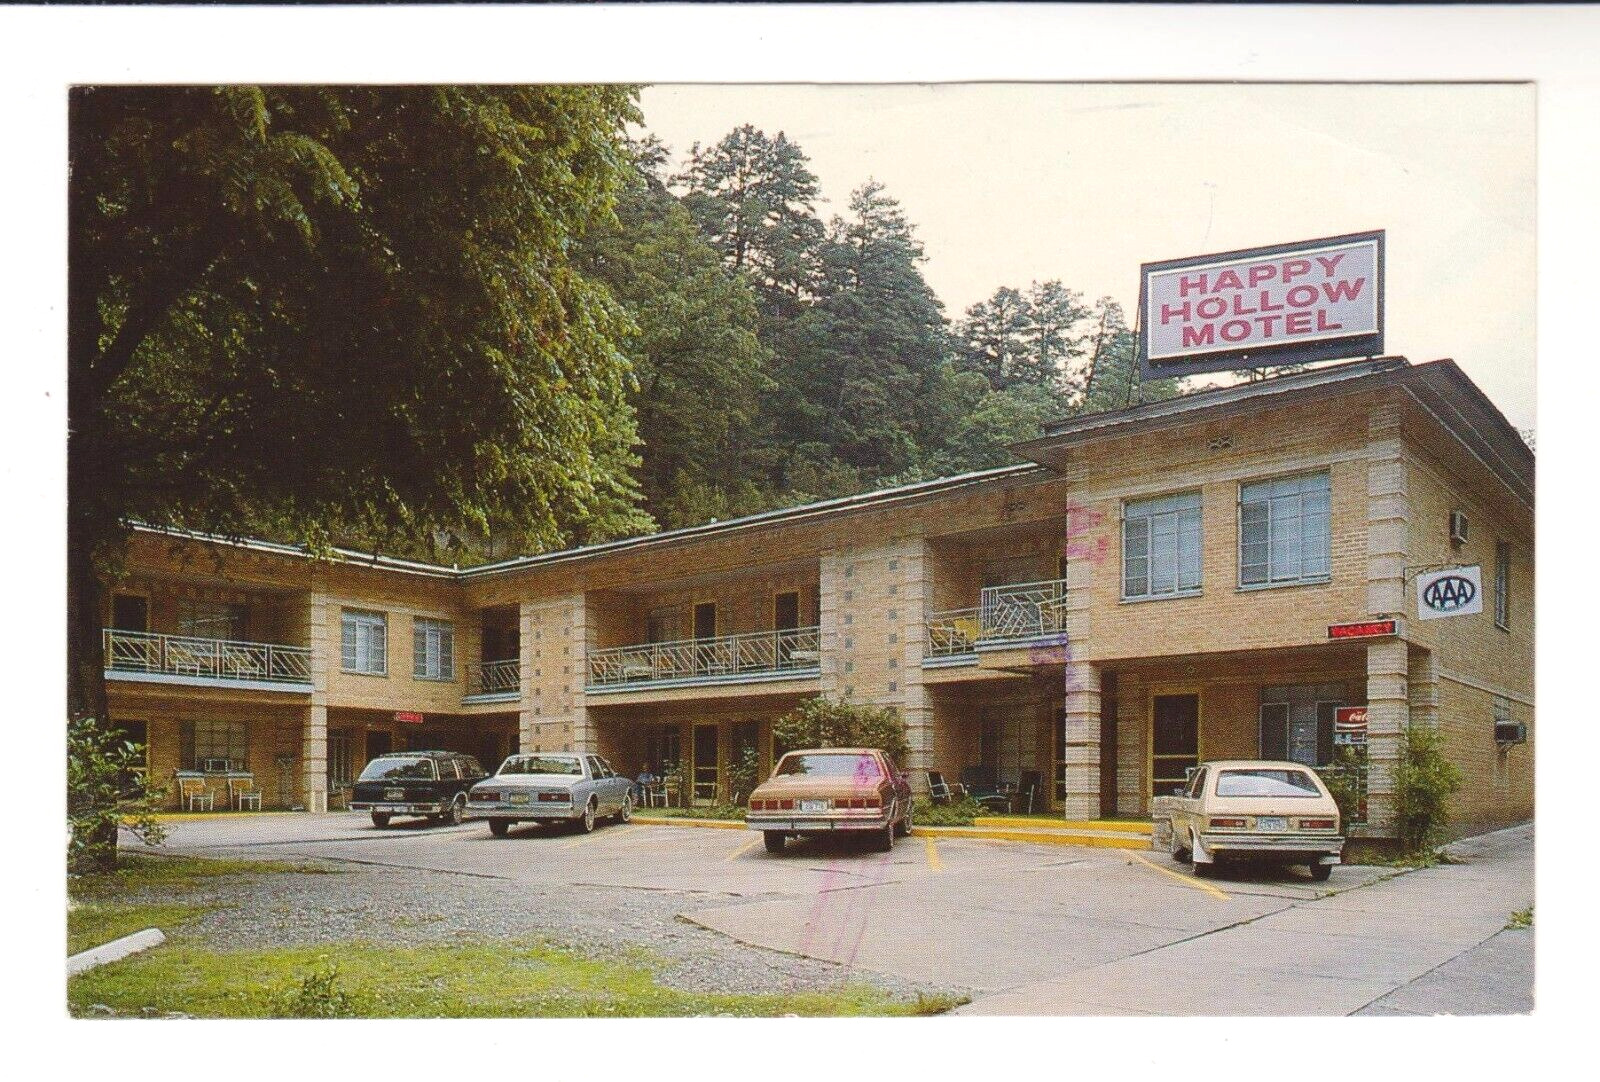 HAPPY HOLLOW MOTEL, 230 FOUNTAIN ST., HOT SPRINGS, ARK. – 1970s Postcard